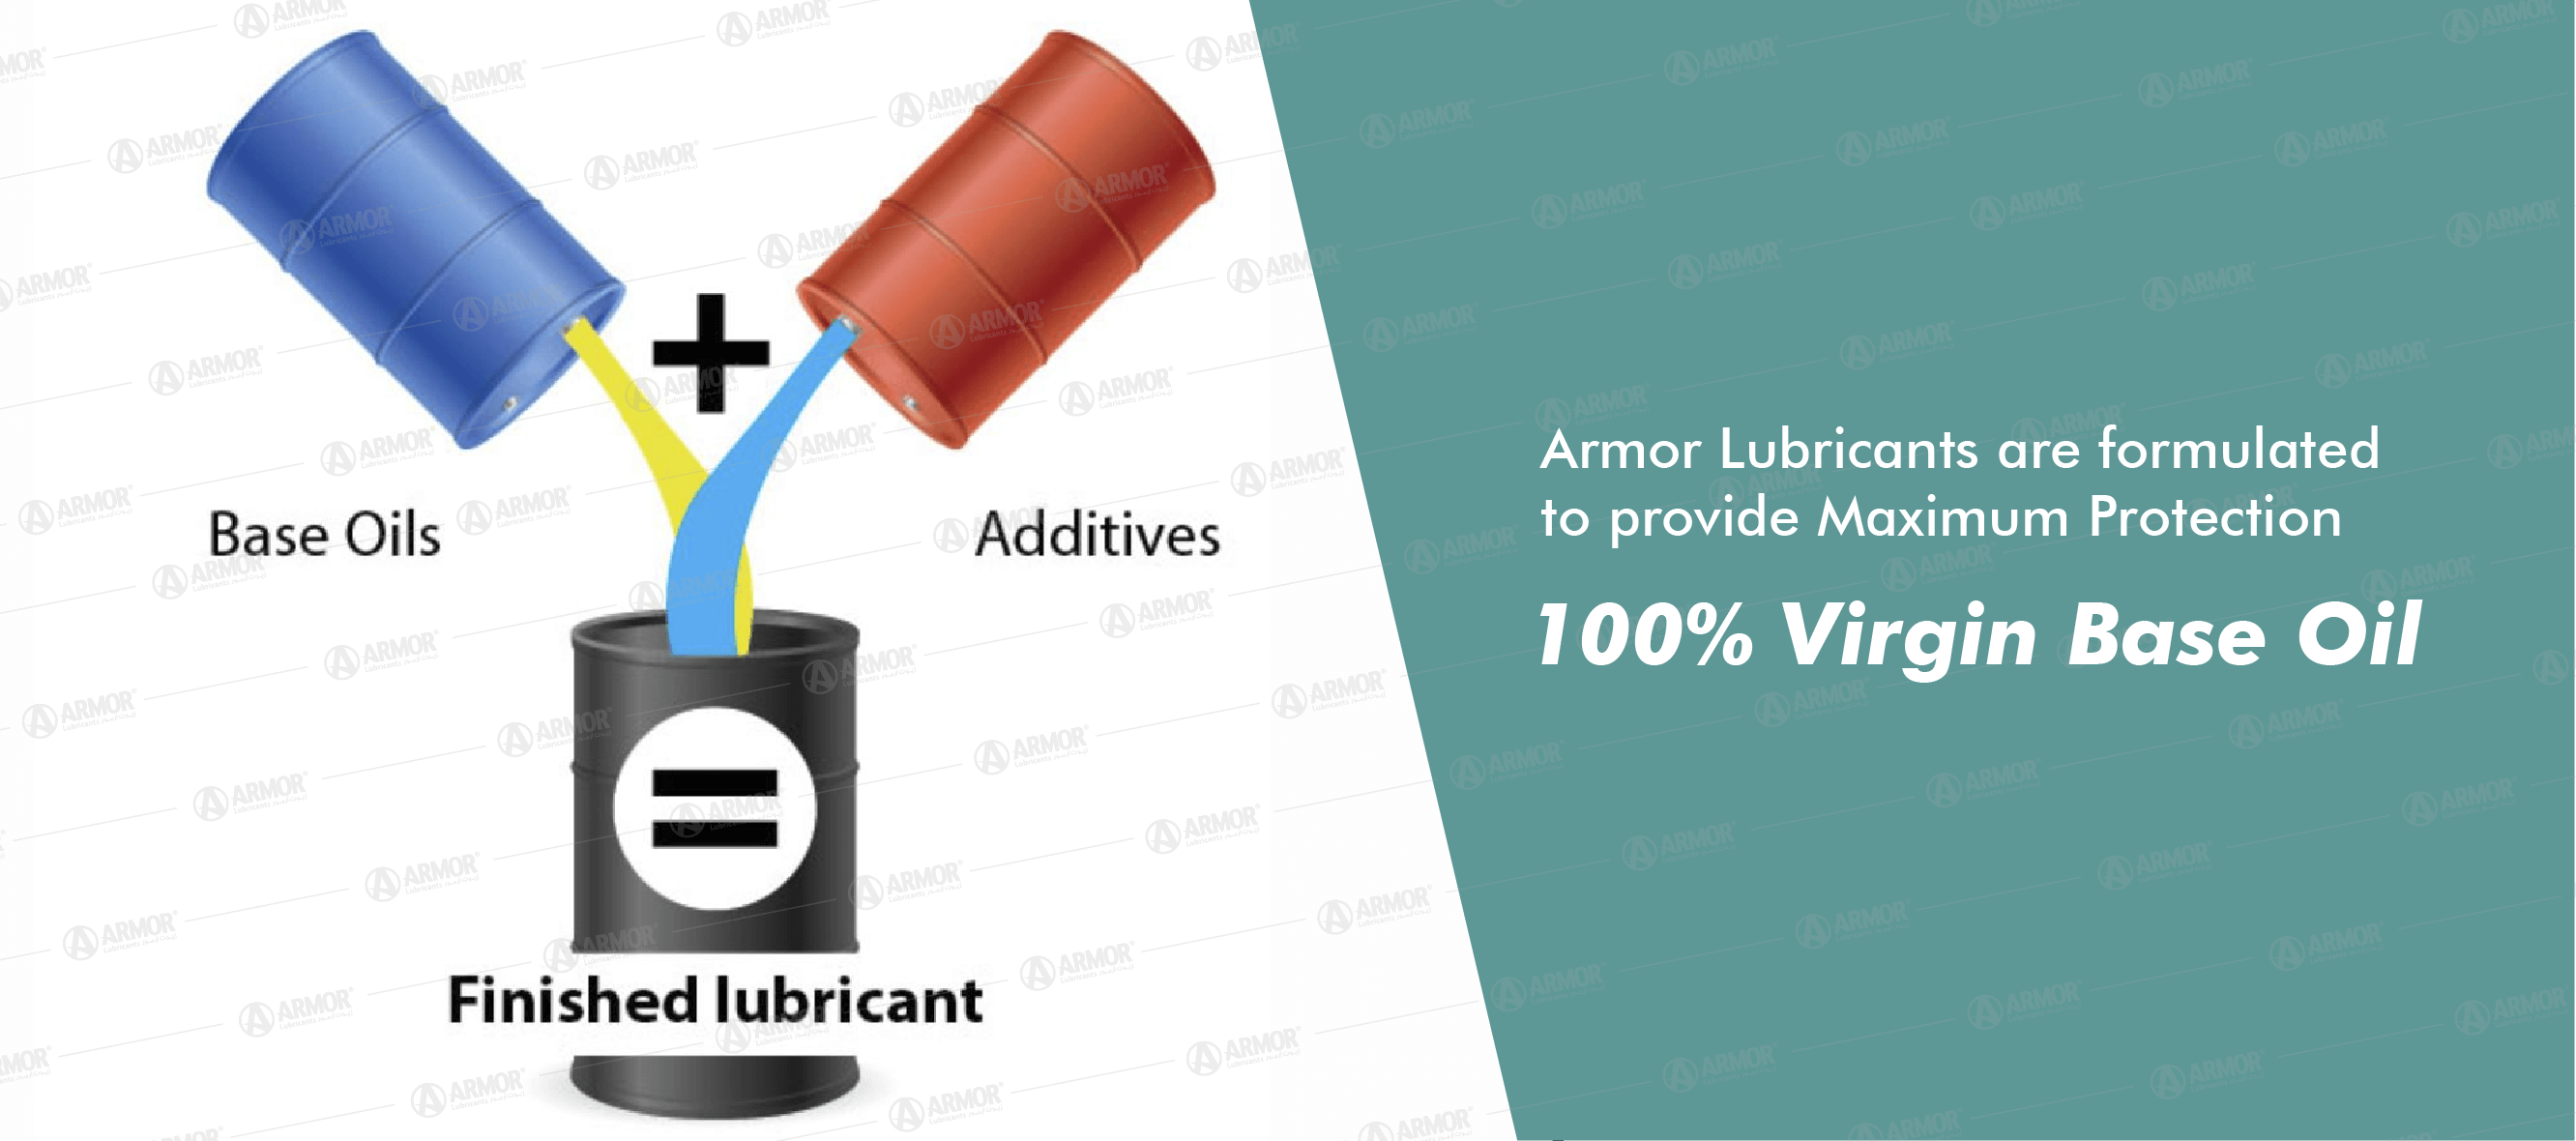 Armor Lubricants are formulated to provide Maximum Protection